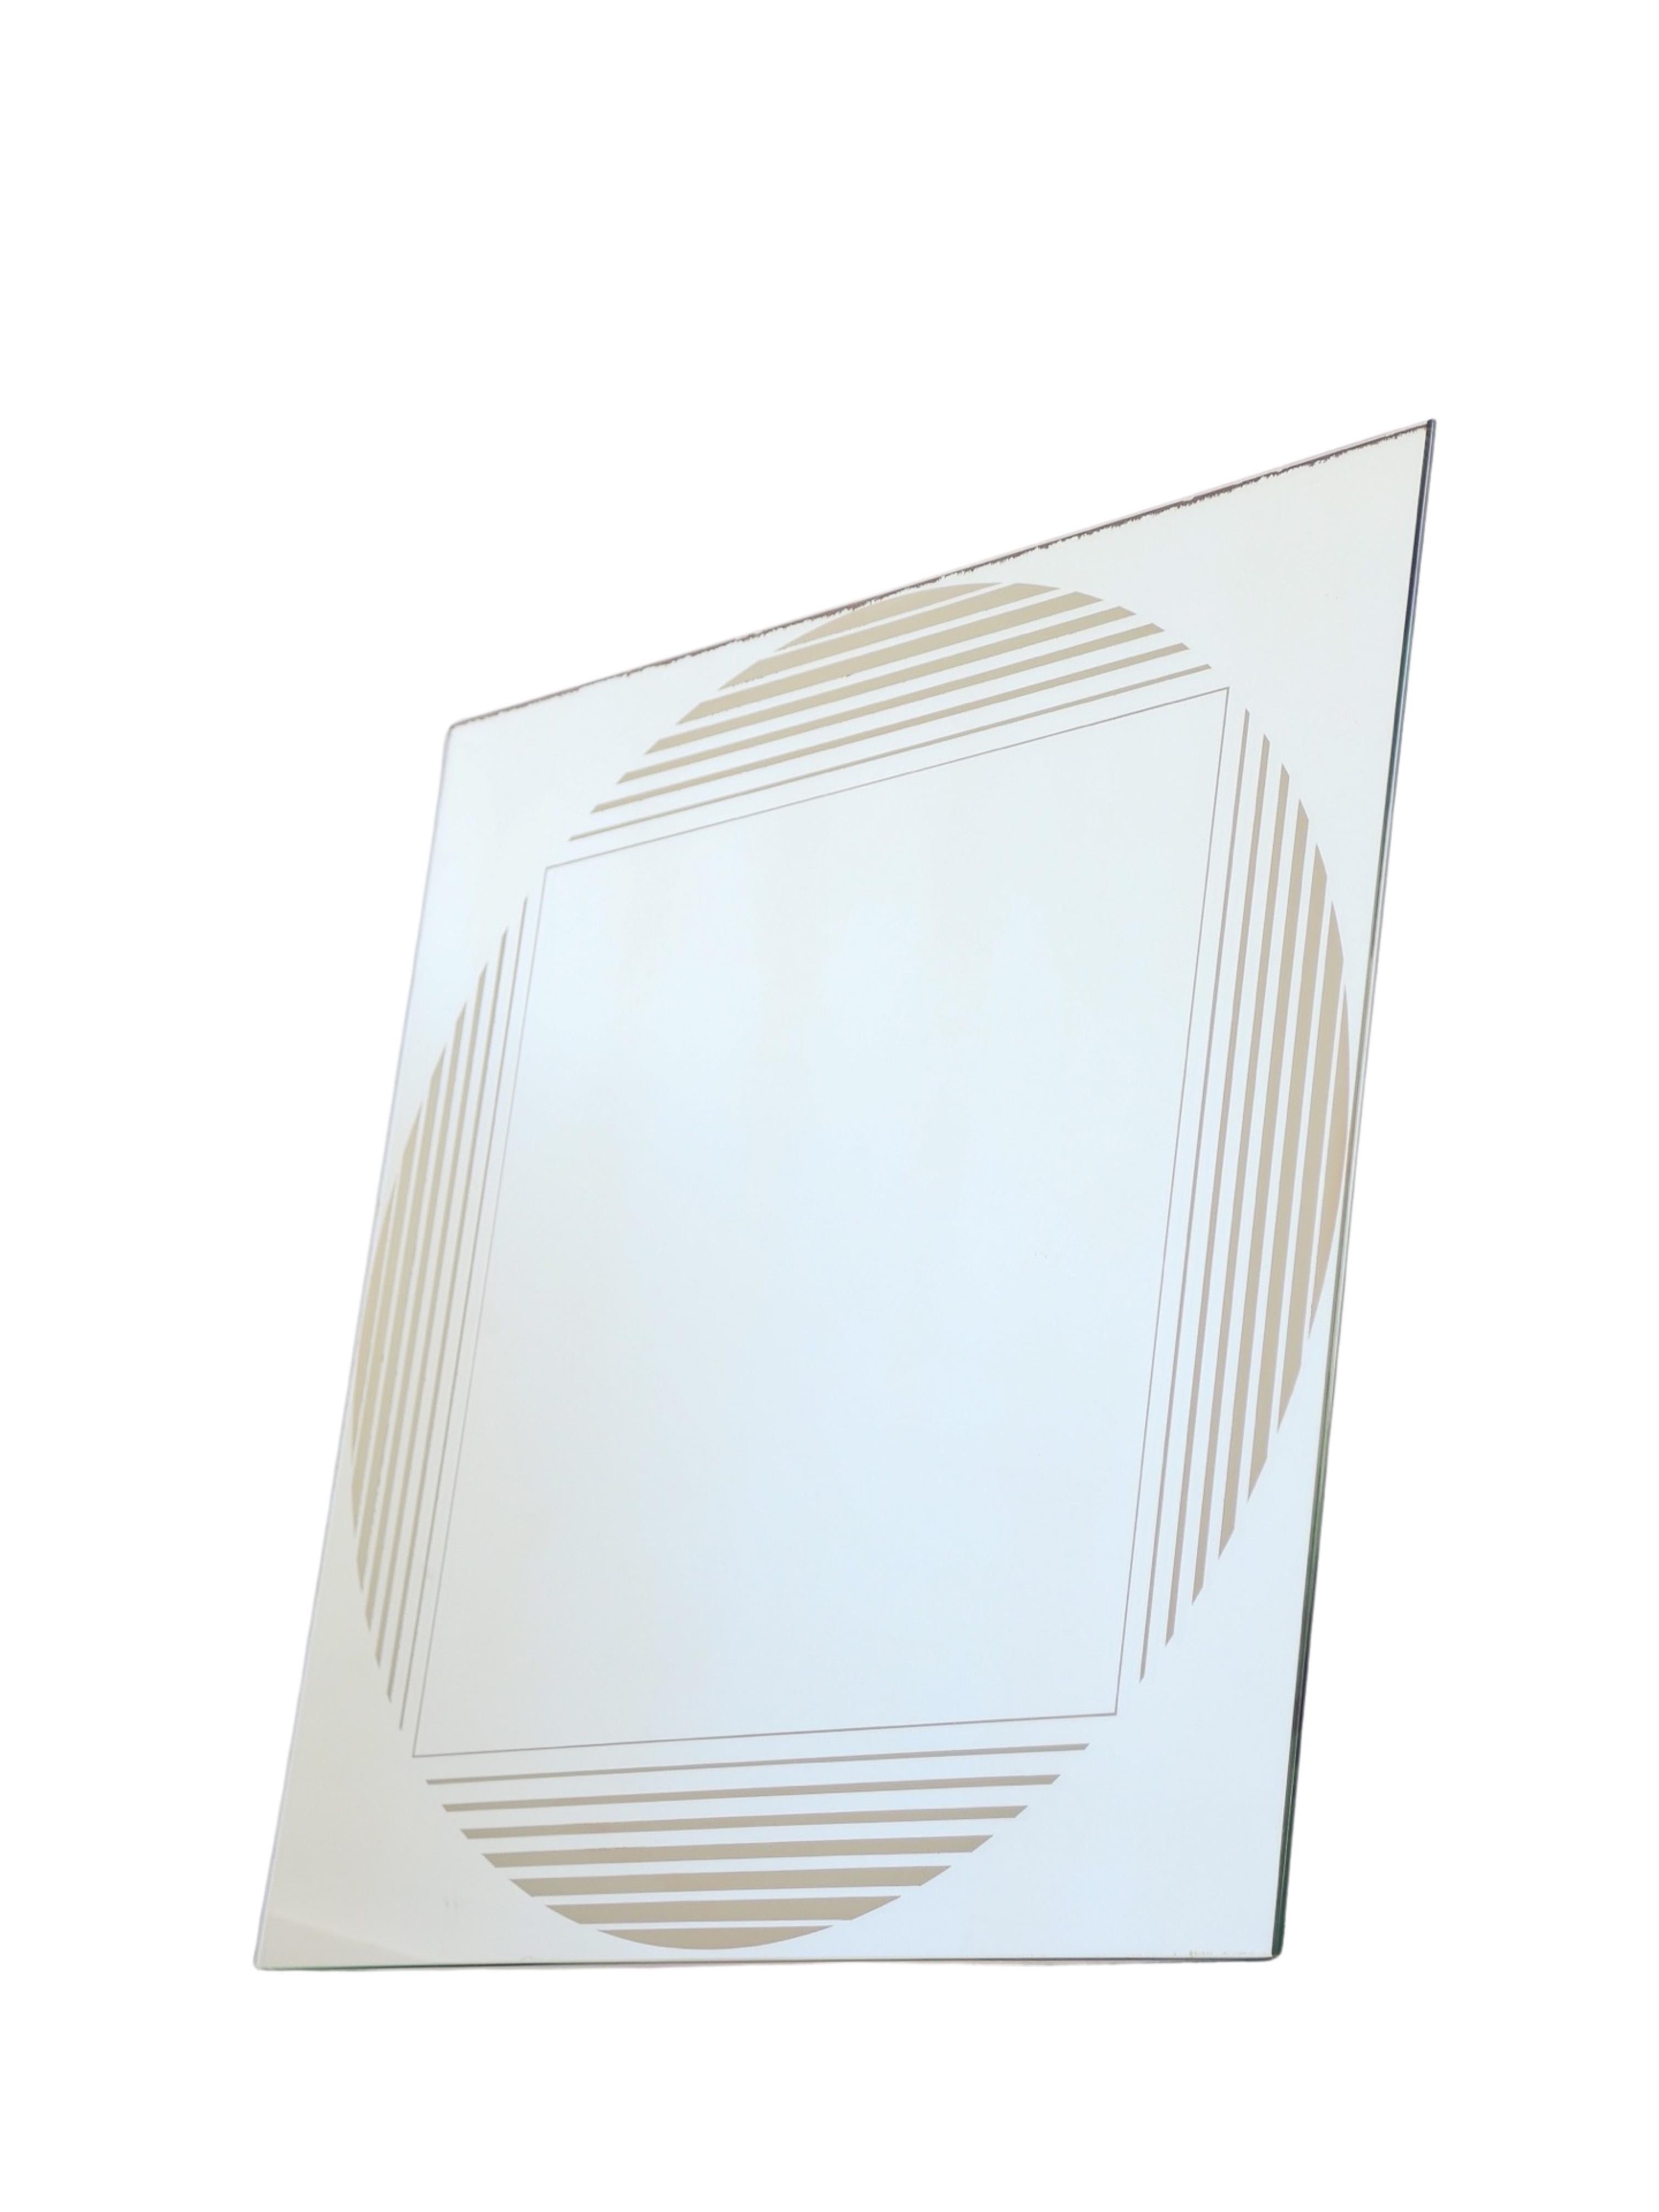 Mid Century Modern Gianni Celada for Fontana Arte Square Wall Mirror  In Good Condition For Sale In Byron Bay, NSW